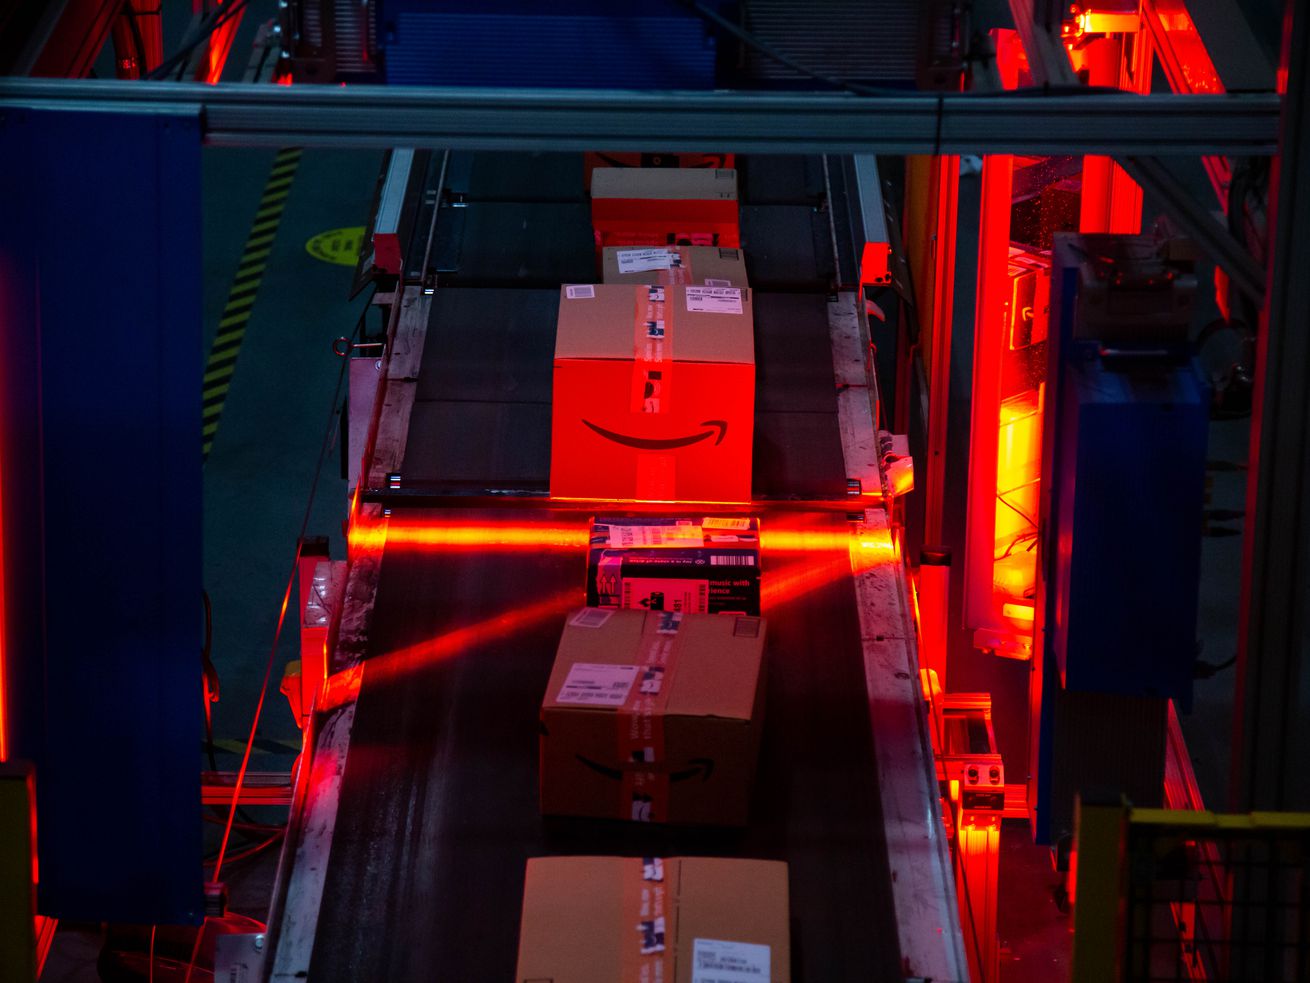 An Amazon-branded box moves through a red light scanner on a conveyer belt.